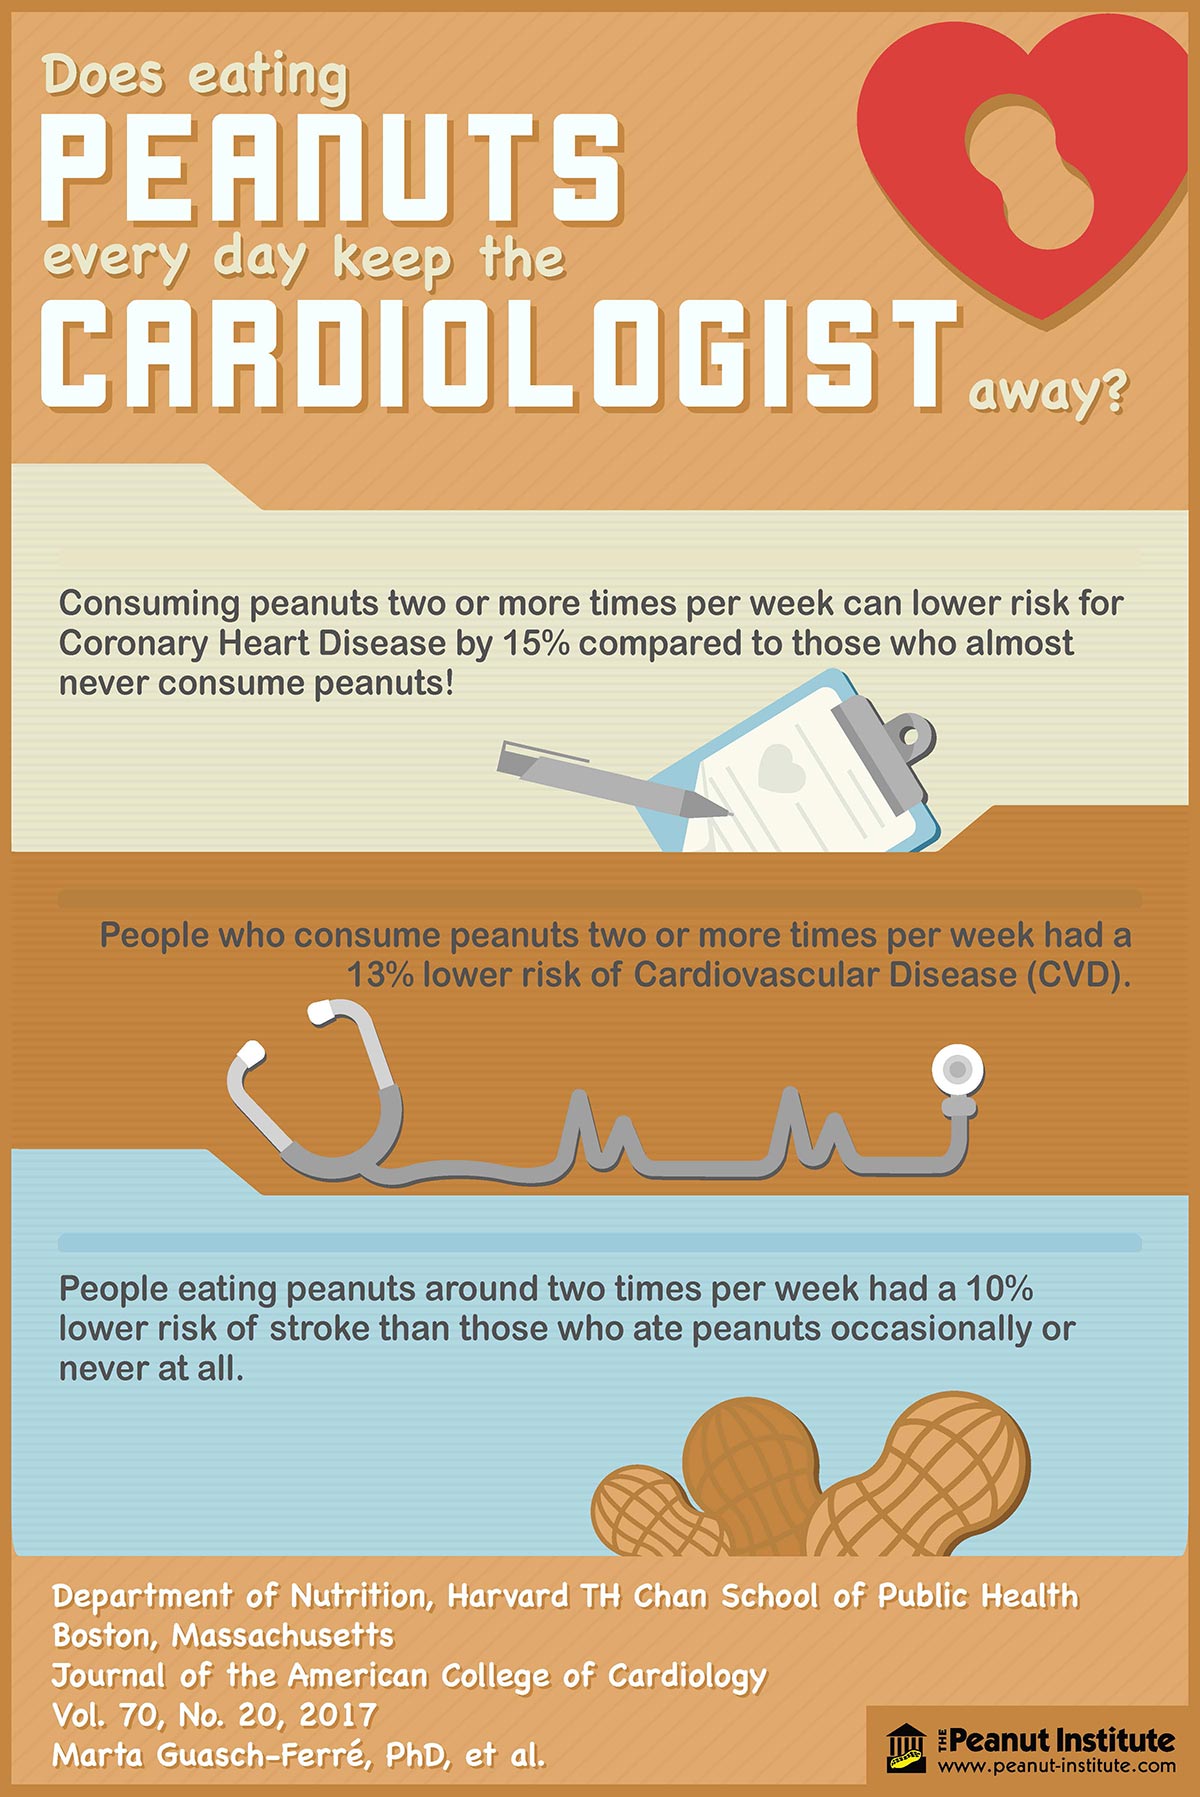 Does Eating Peanuts Every Day Keep The Cardiologist Away?